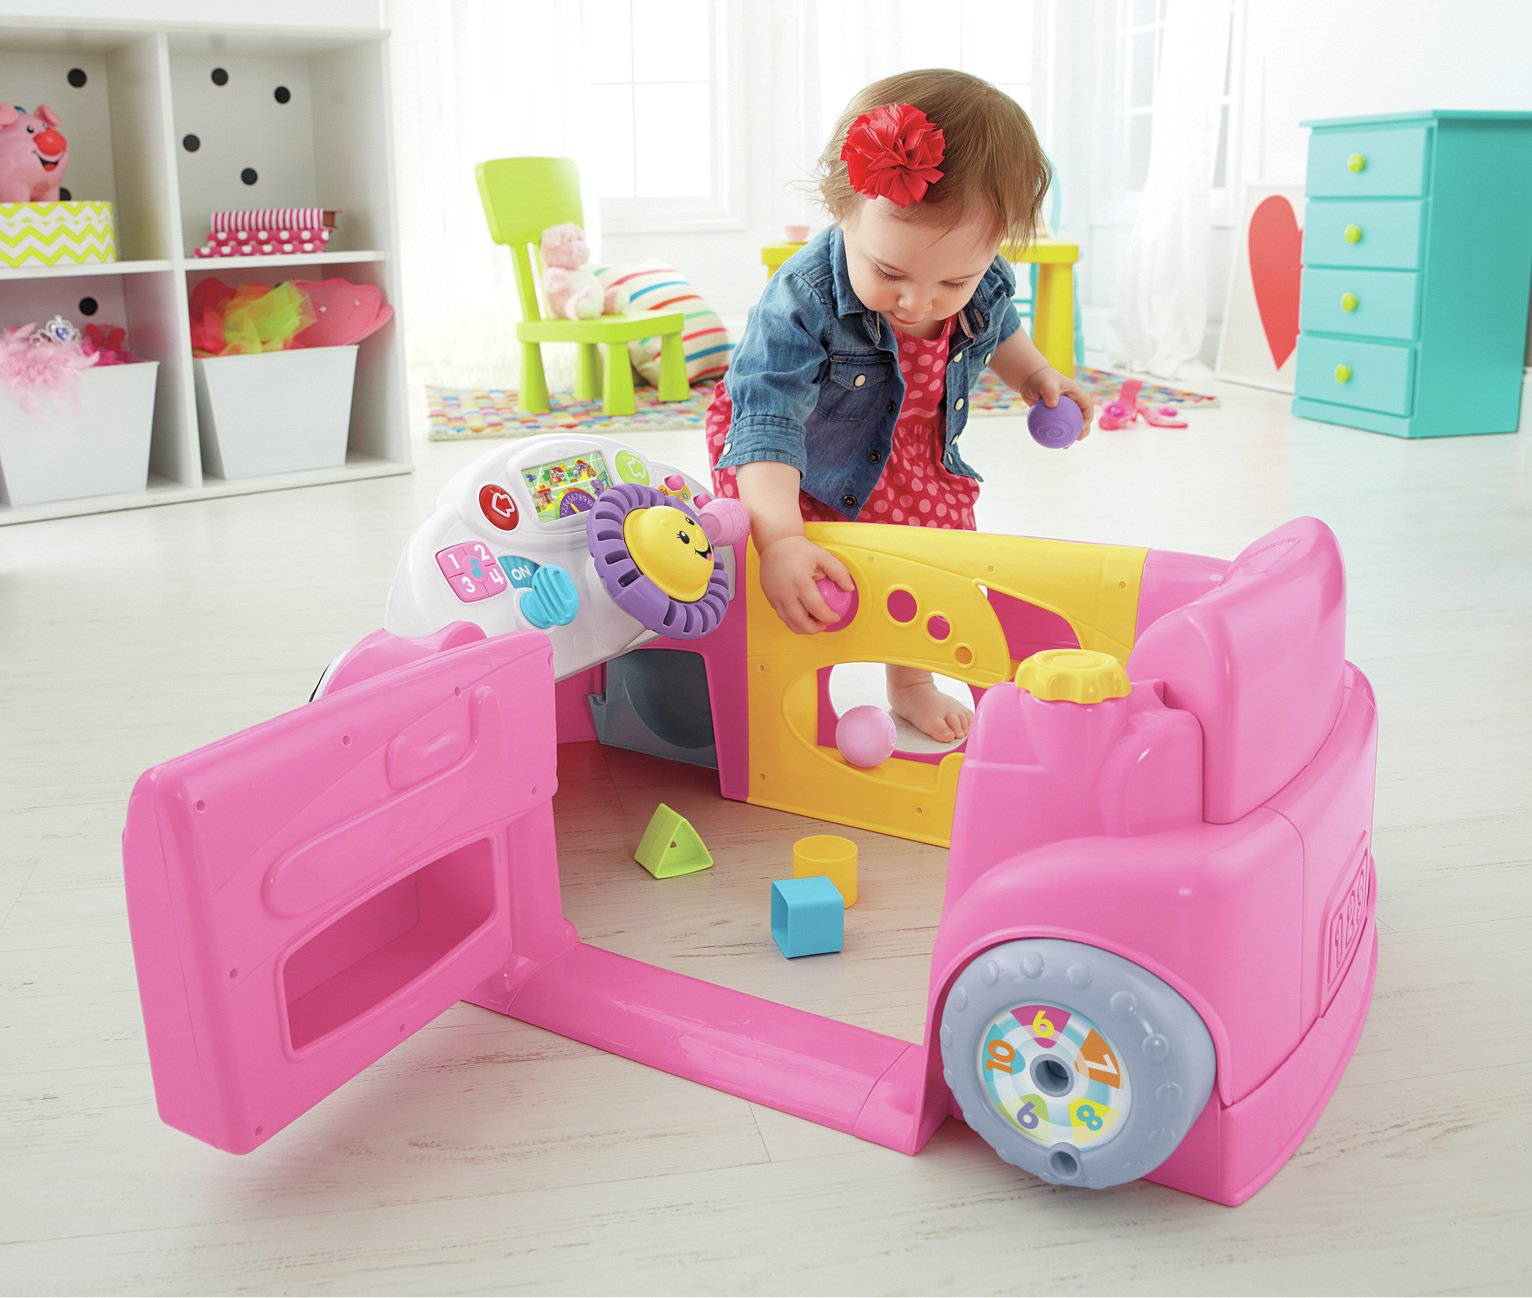 fisher price laugh and learn crawl around car